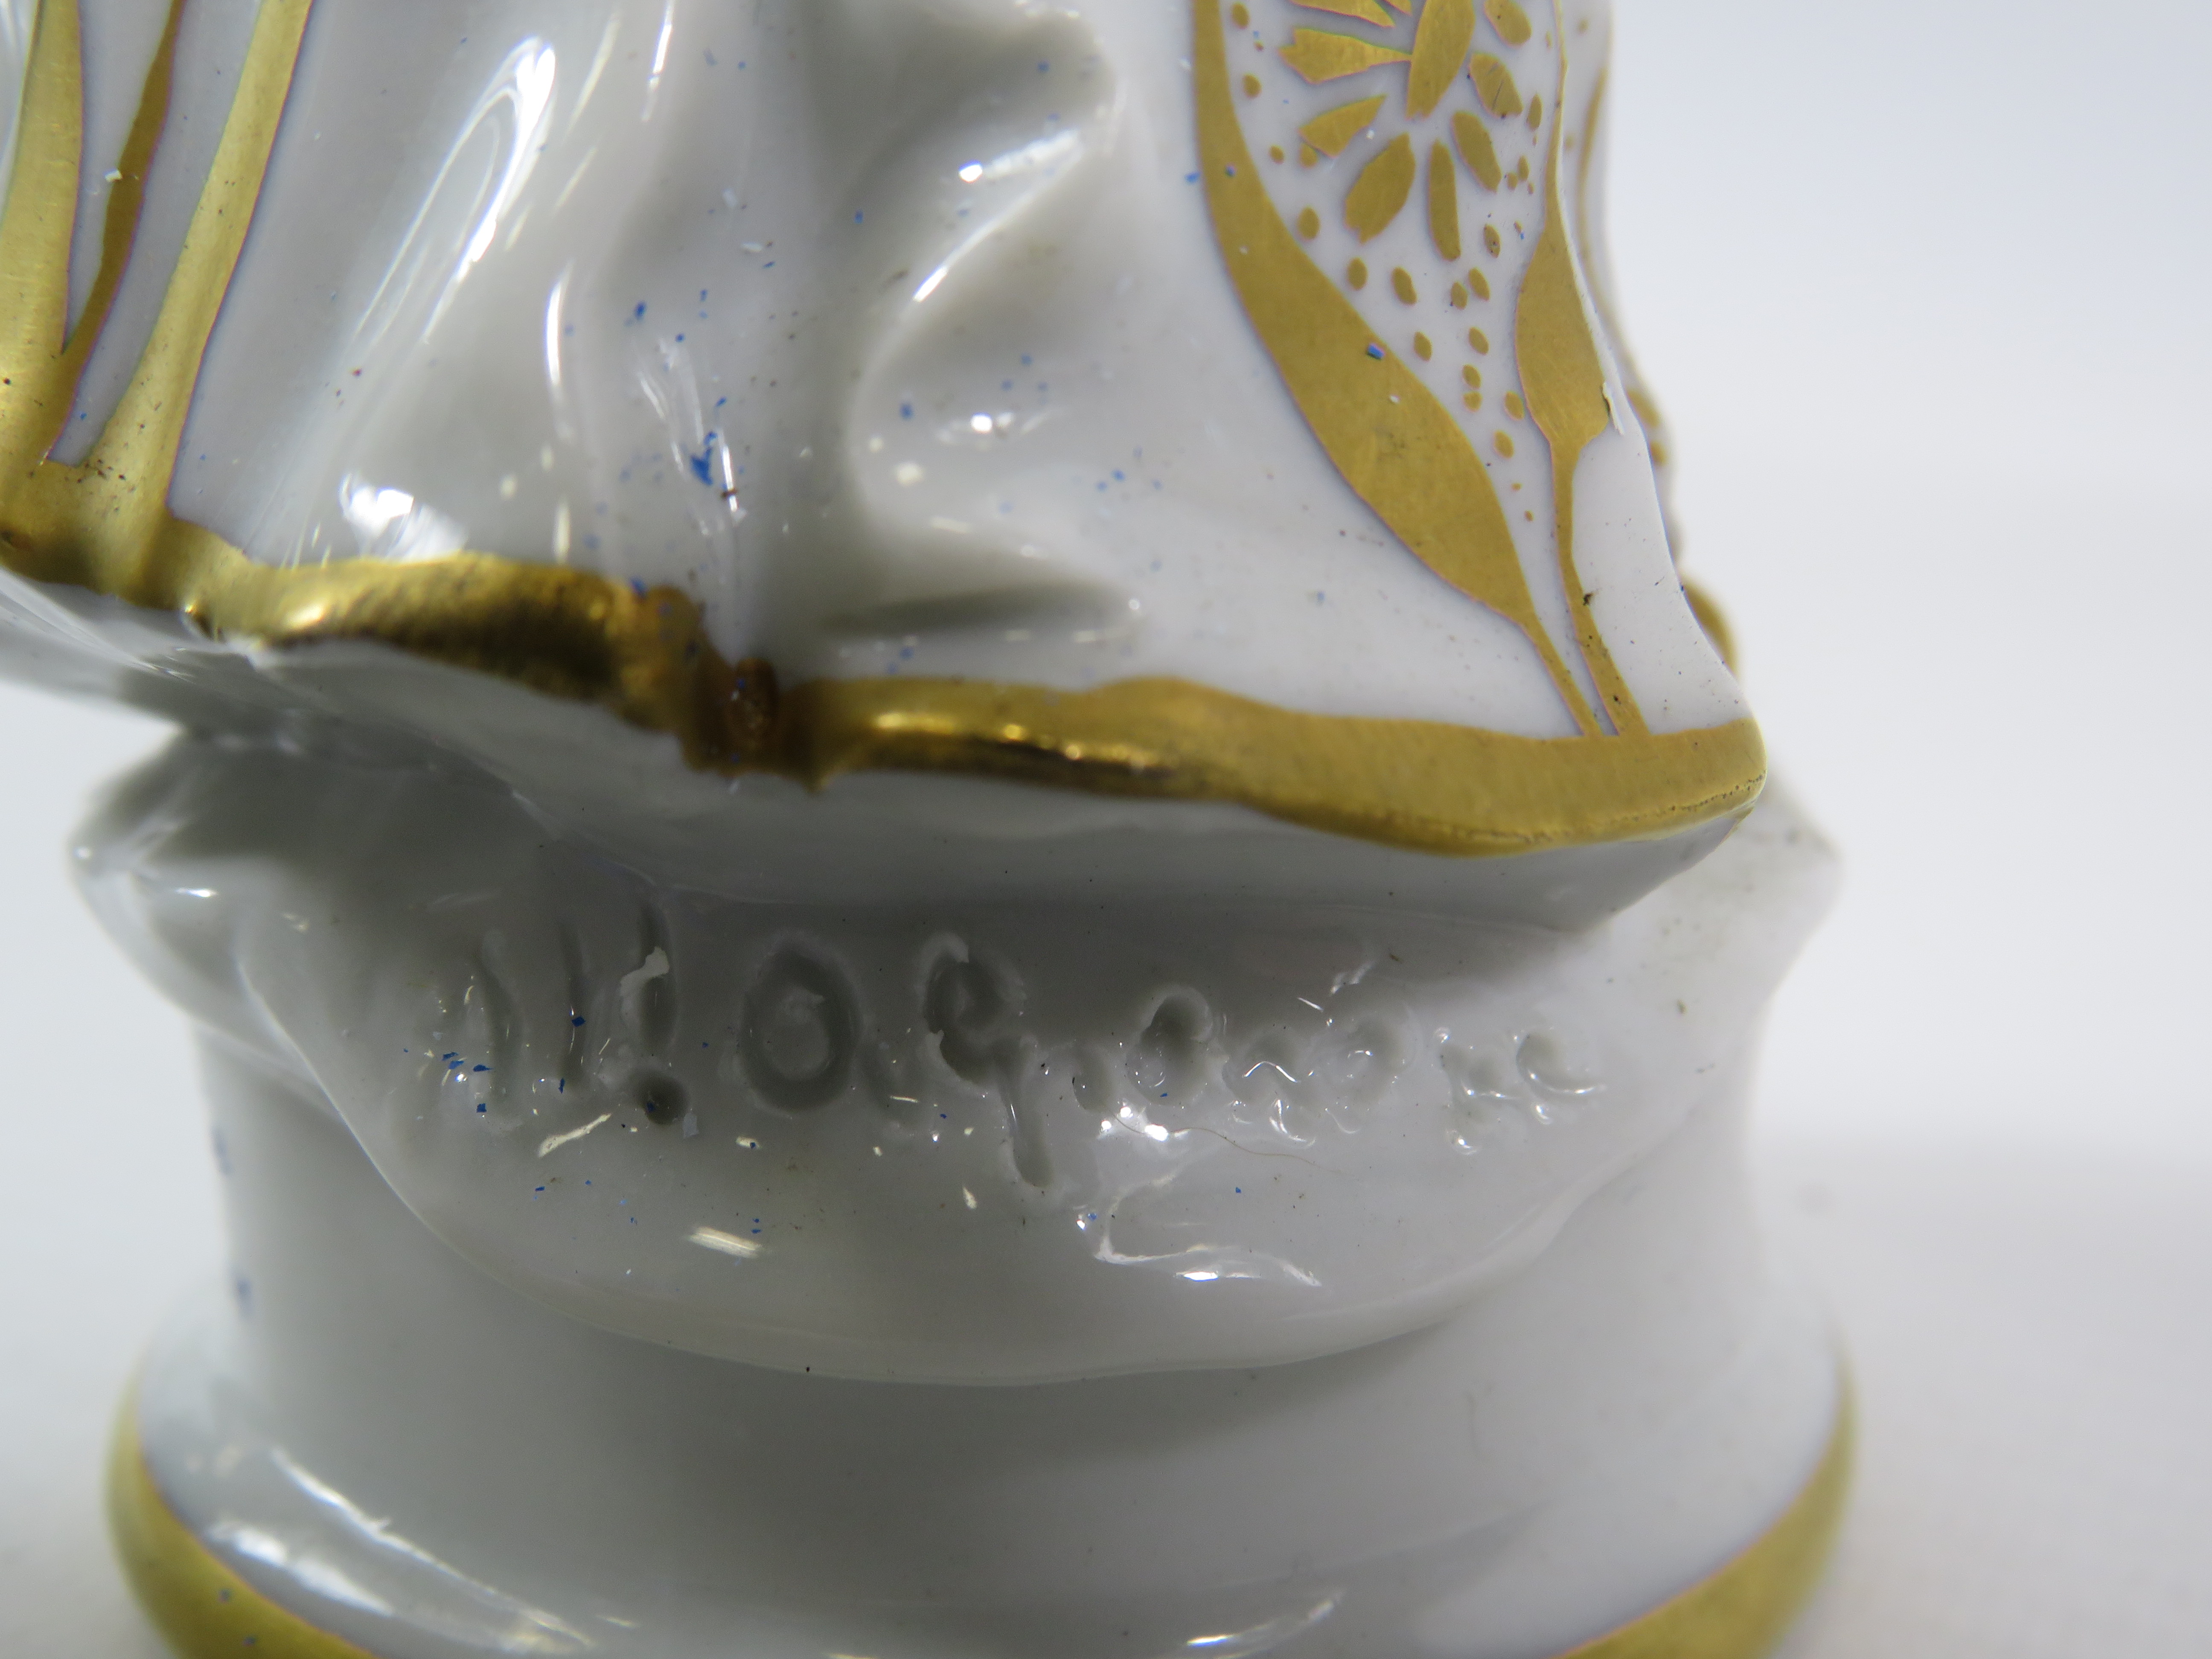 2 Signed Capodimonte white and gold porcelain figurines, the tallest measures 22cm. - Image 4 of 4